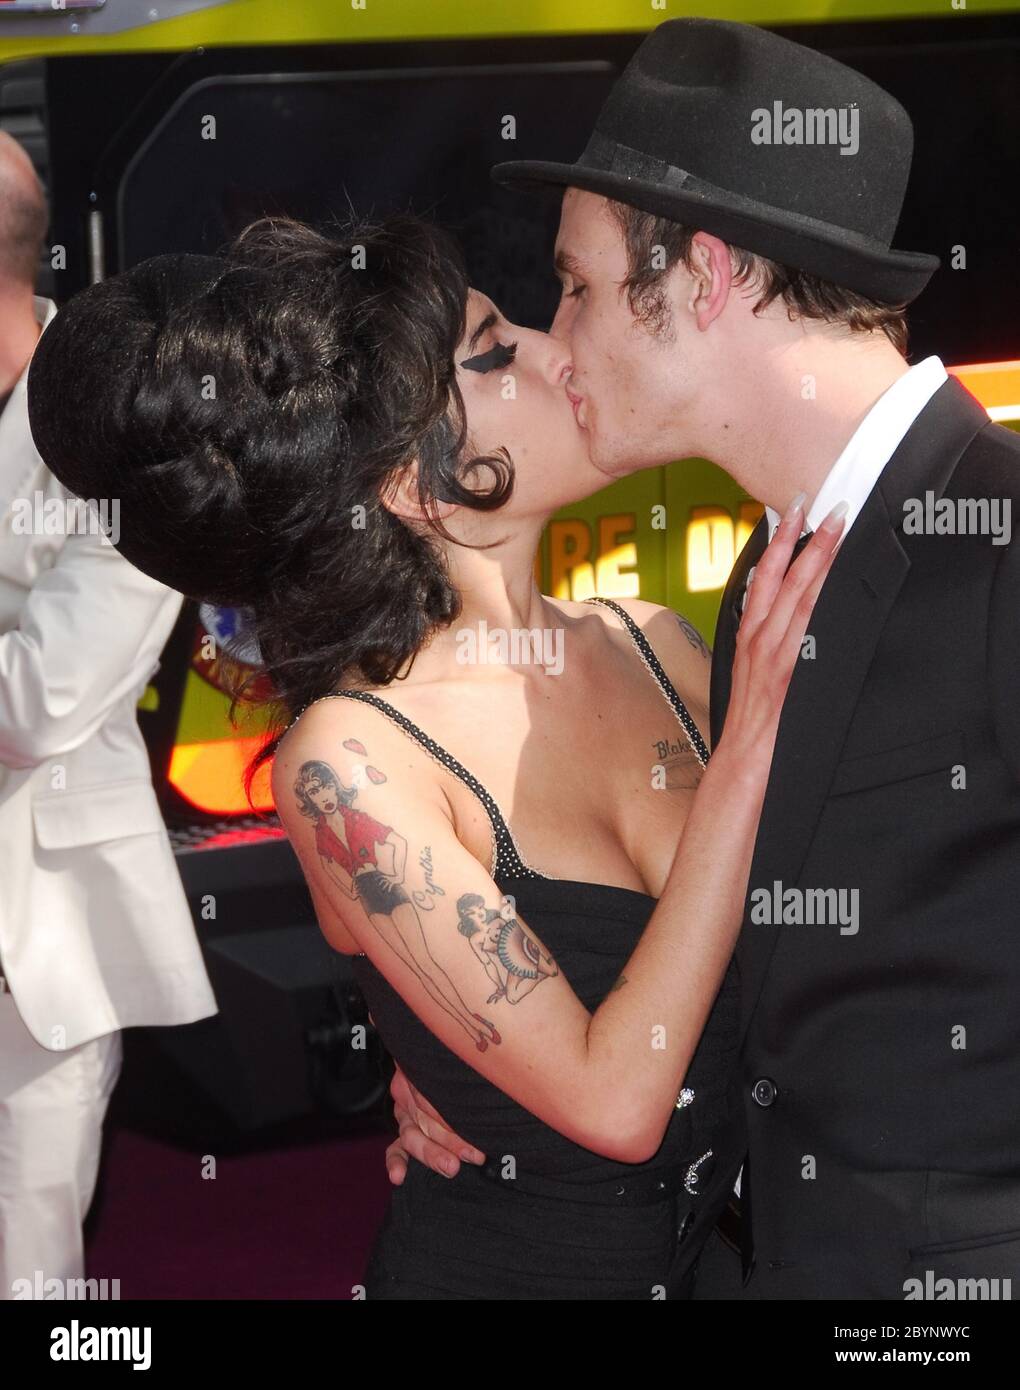 Amy Winehouse and husband Blake Fielder-Civil at the 2007 MTV Movie Awards - Arrivals held at the Gibson Amphitheater, Universal Studios Hollywood in Universal City, CA. The event took place on Sunday, June 3, 2007. Photo by: SBM / PictureLux - File Reference # 34006-6675SBMPLX Stock Photo